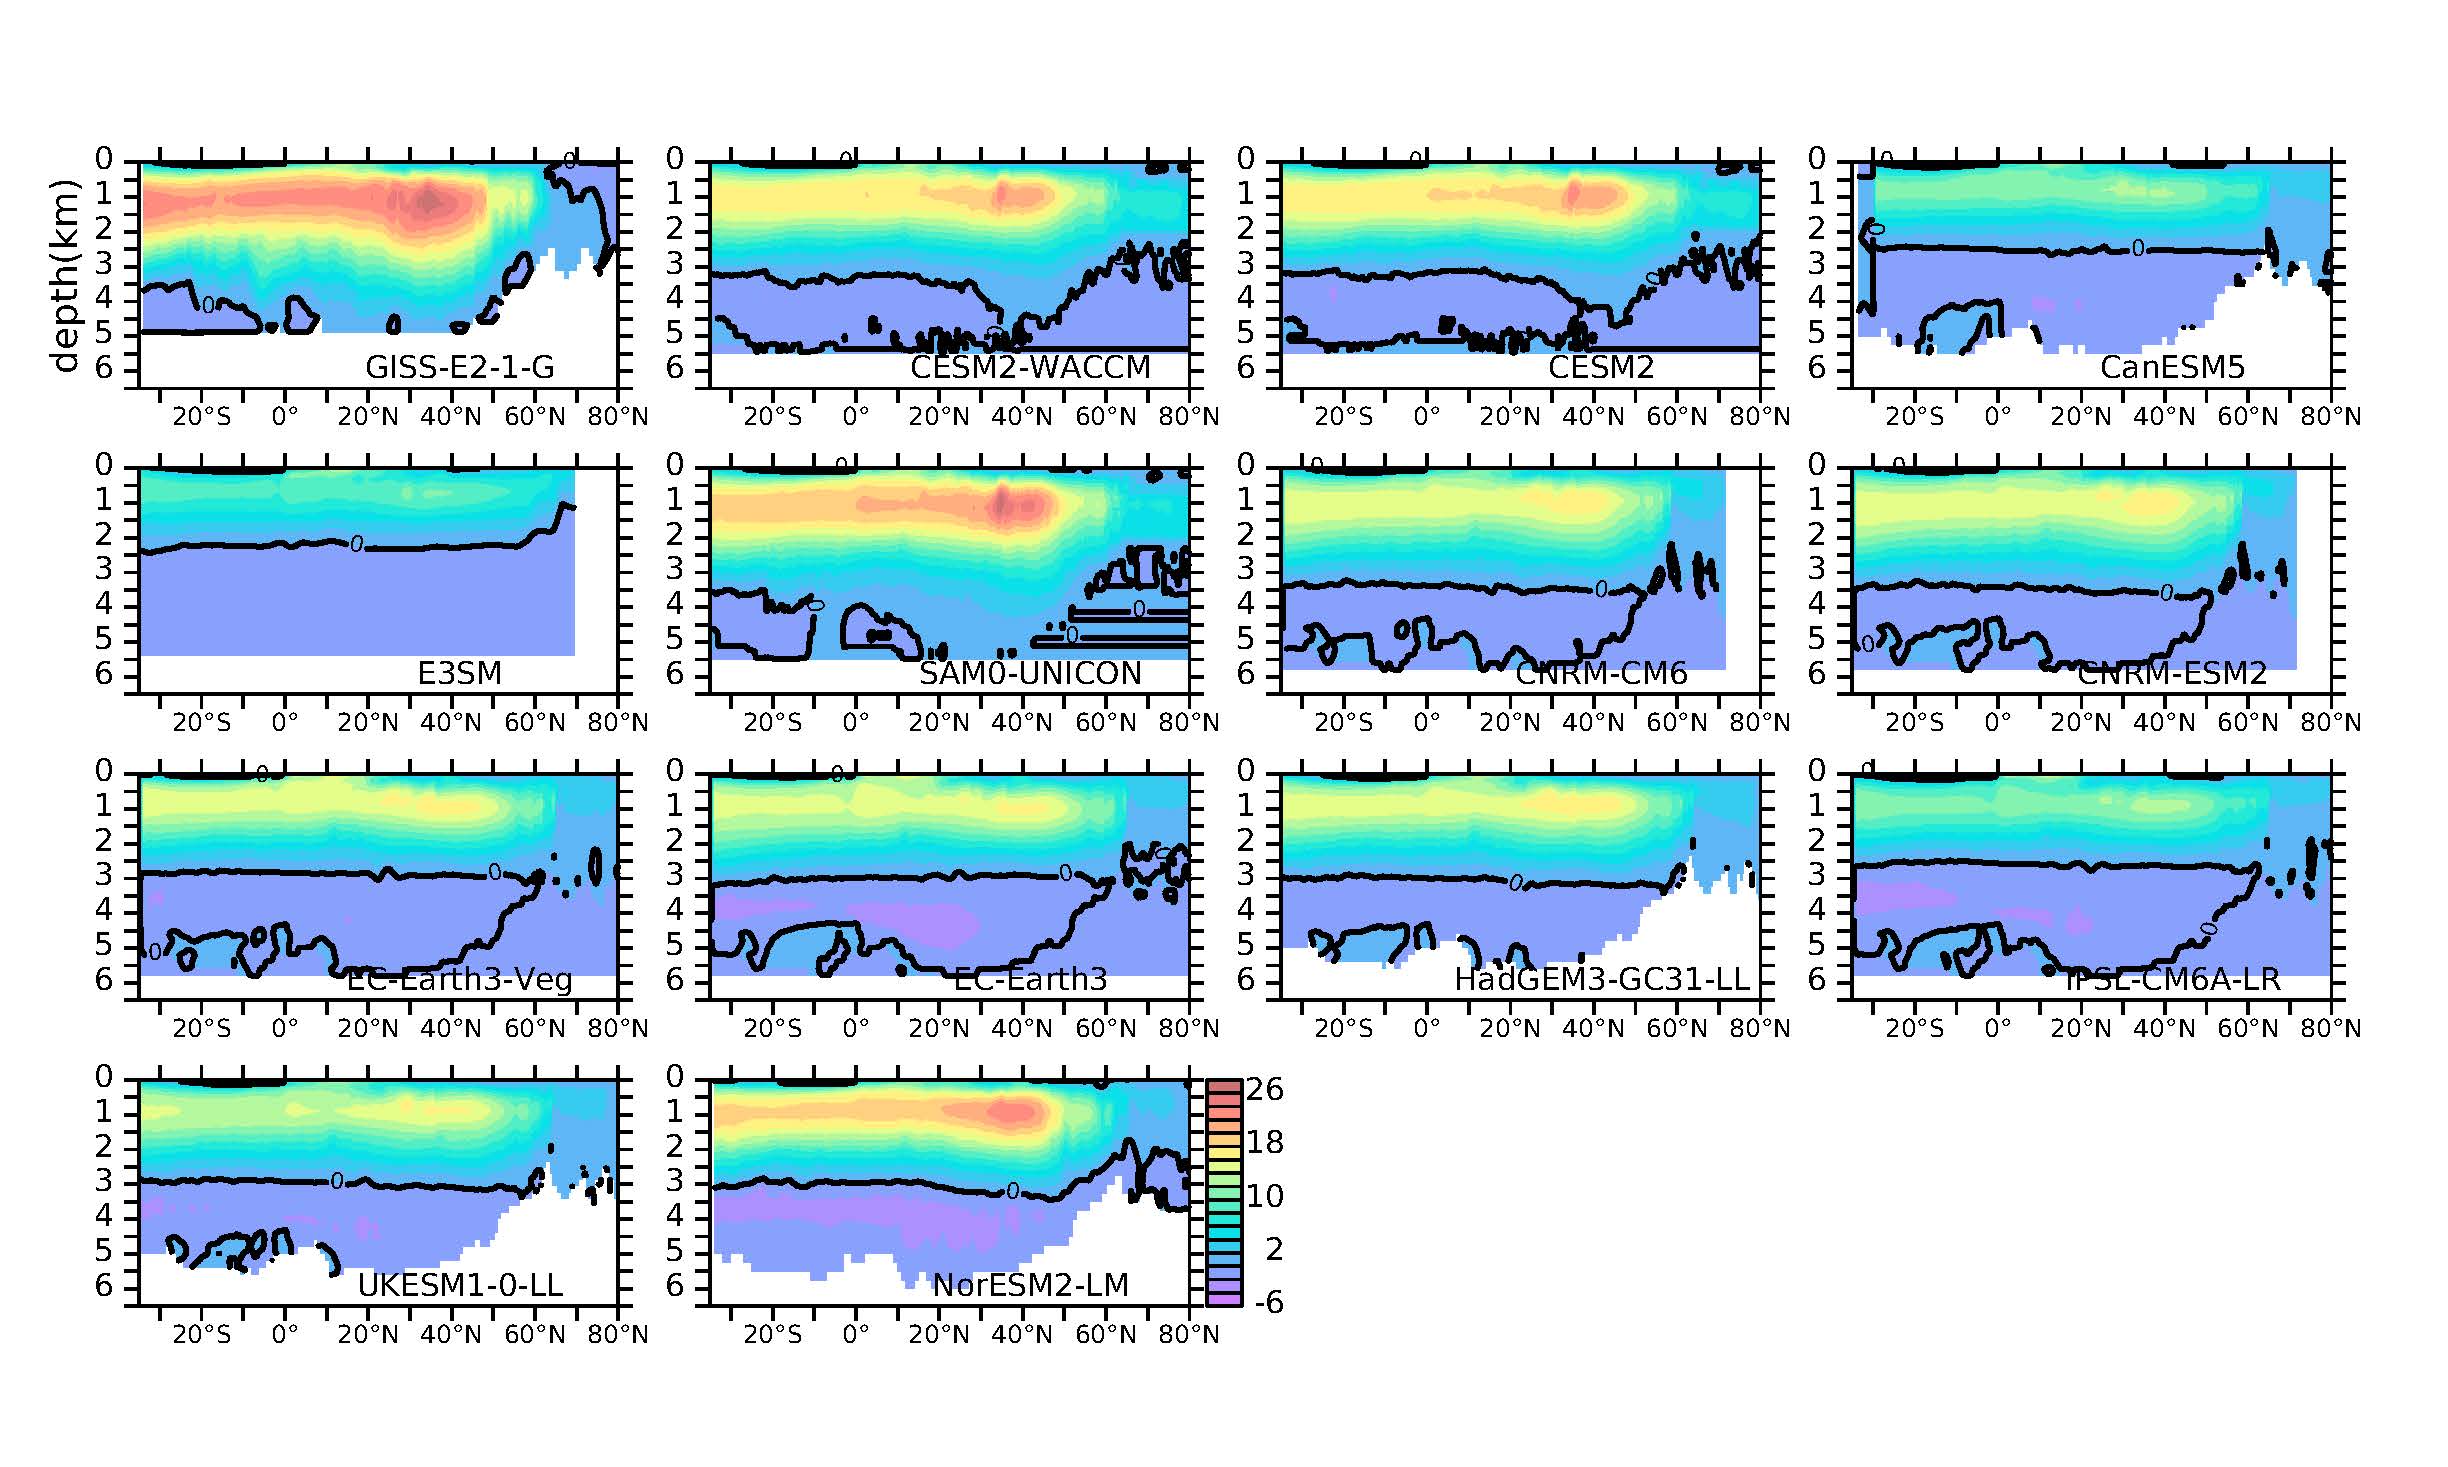 An example of a multi-model analysis using the Coupled Model Intercomparison Project archive, showing the representation of the Atlantic Meridional Overturning Circulation by different models. 